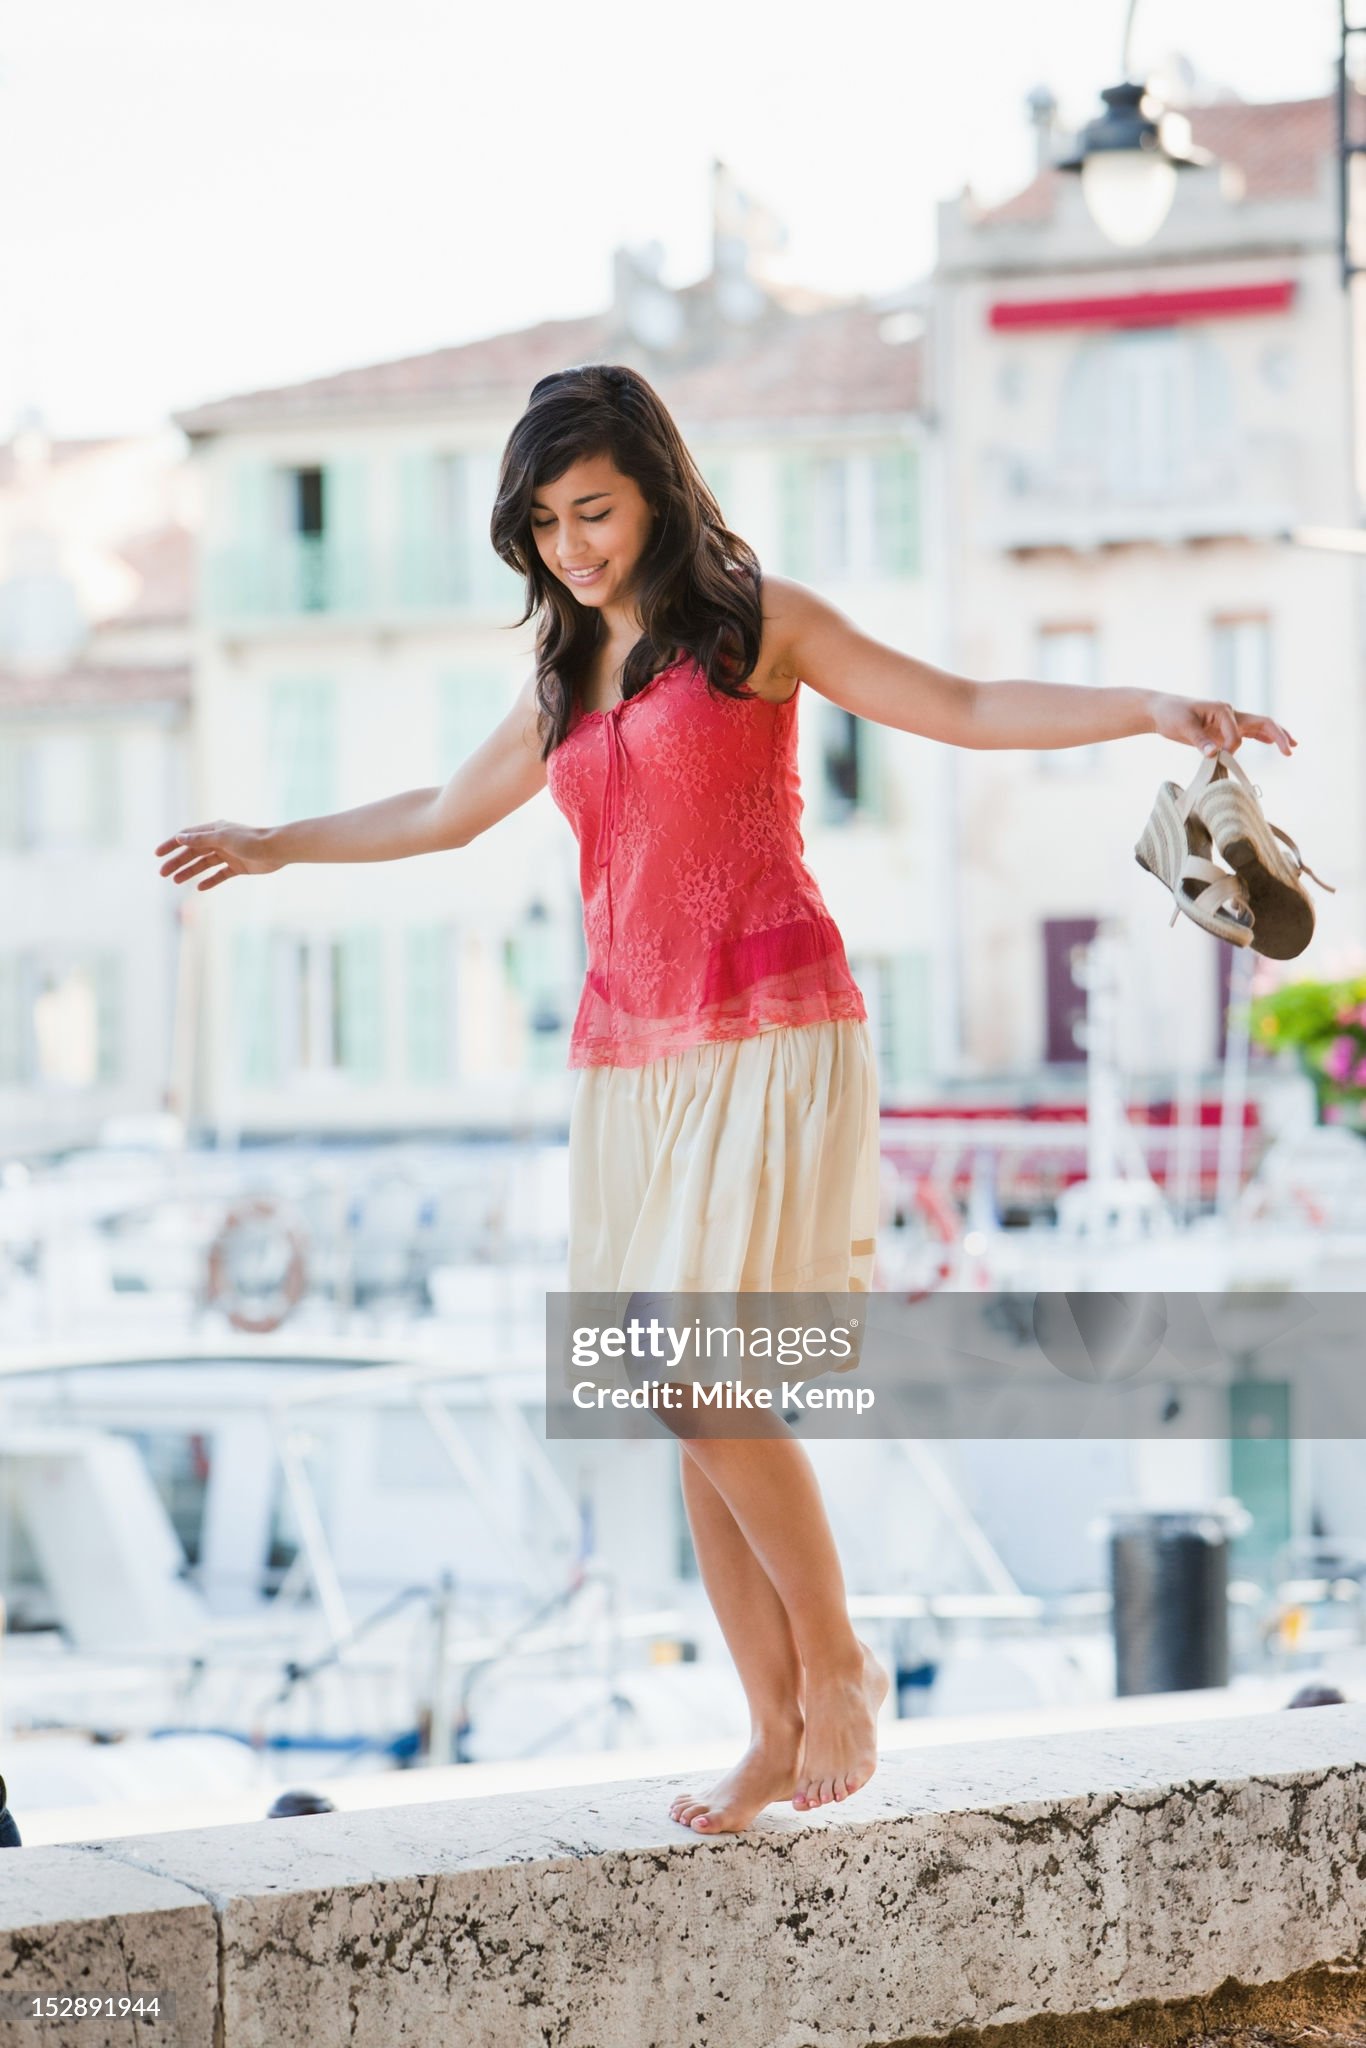 https://media.gettyimages.com/id/152891944/photo/france-cassis-young-woman-balancing-on-stone-wall.jpg?s=2048x2048&amp;w=gi&amp;k=20&amp;c=_OAUNkIS8XEQO4_2_sNWmaOdHur8Gh-XKGqBPgztWCE=